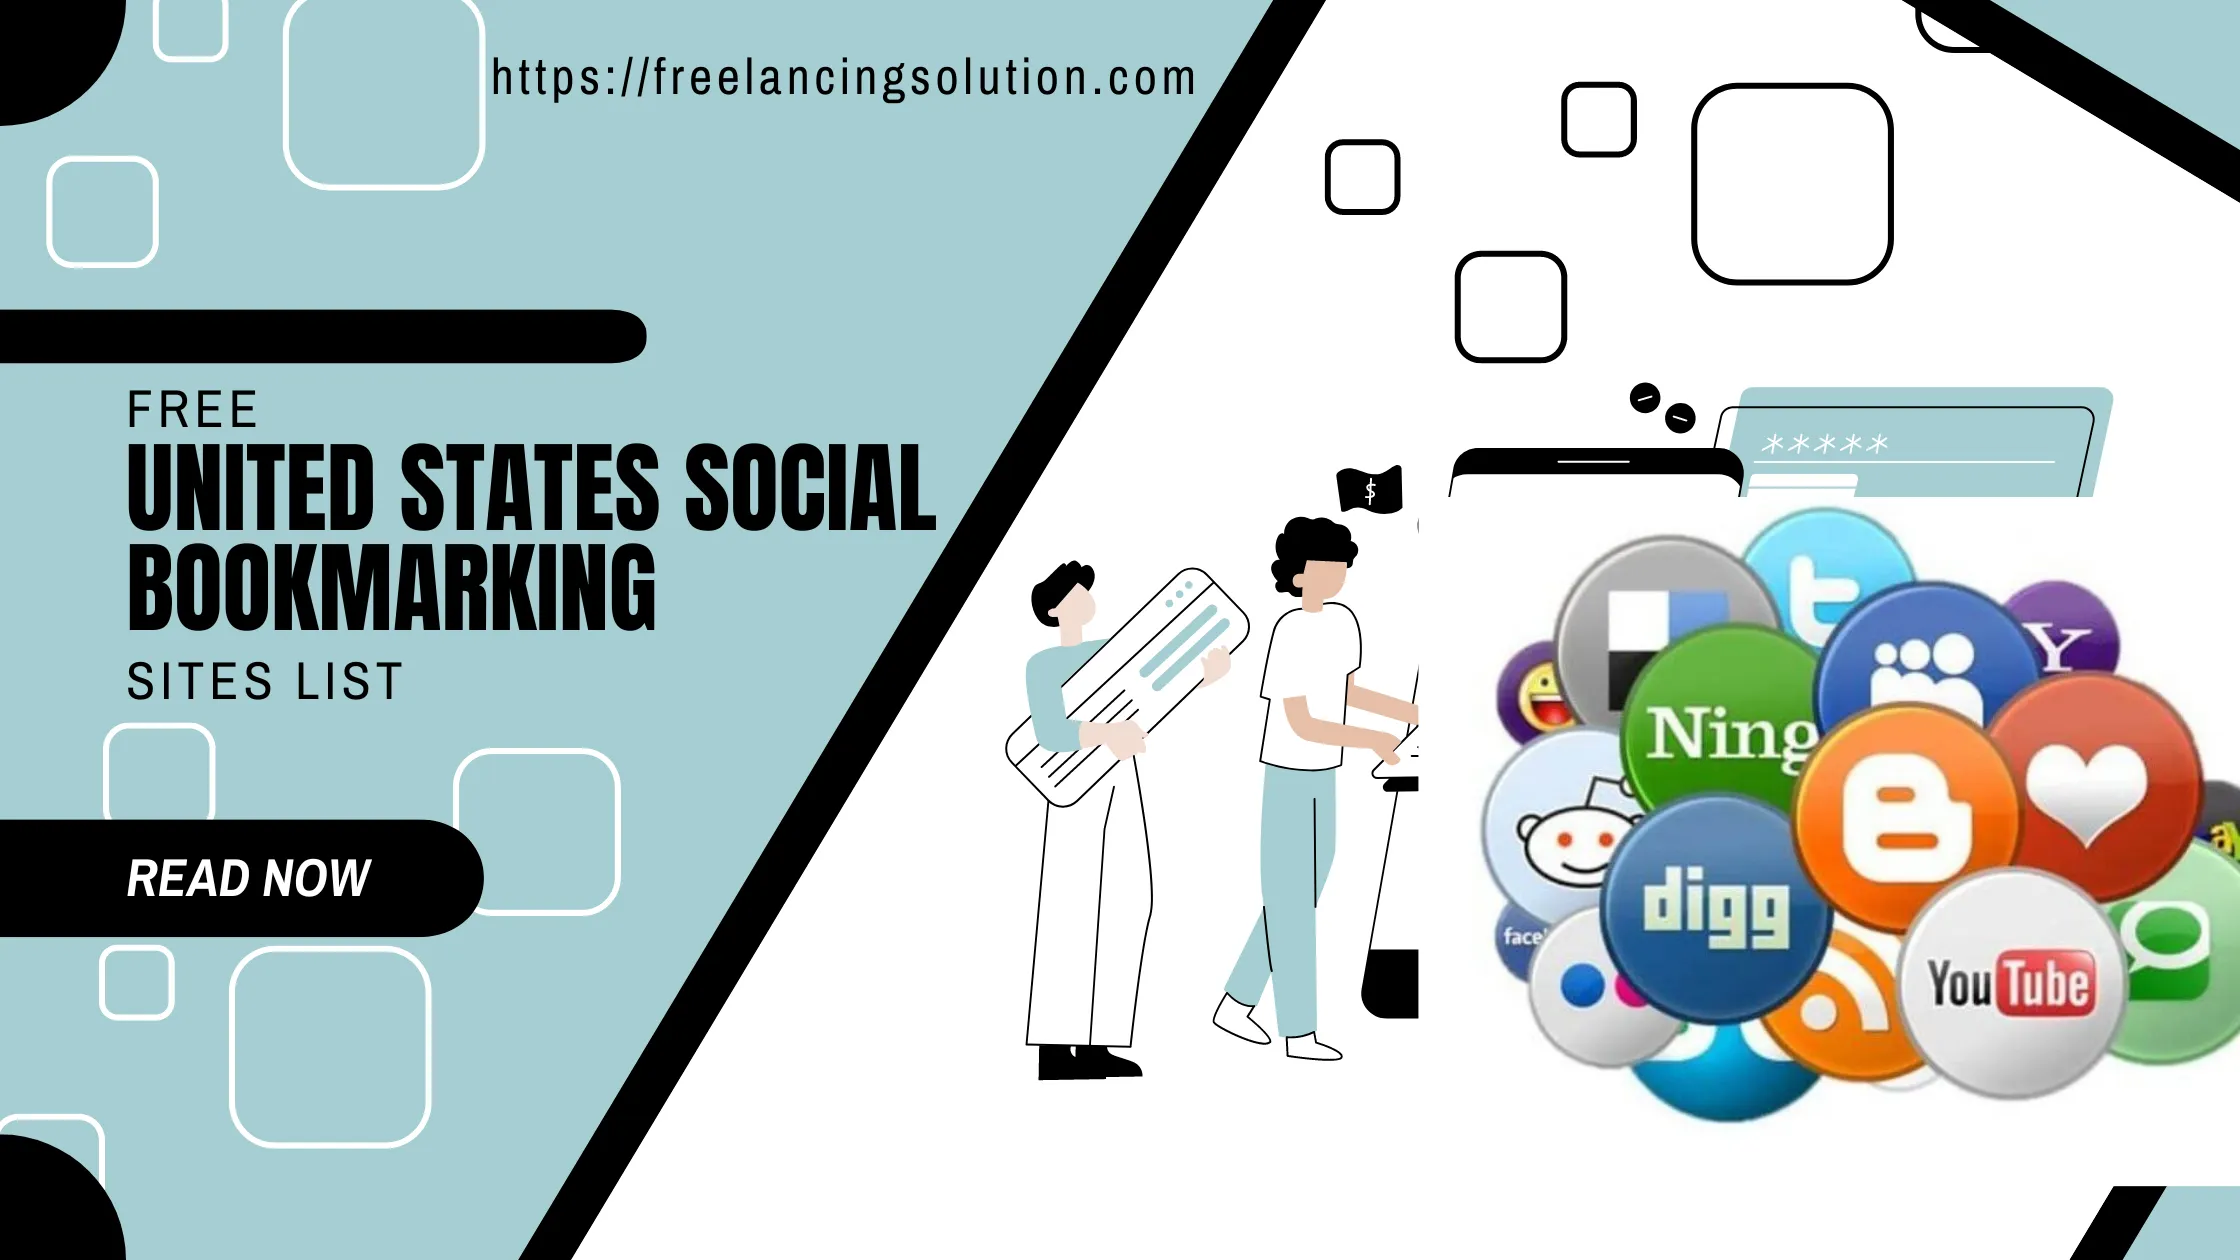 Free United States Social Bookmarking Sites List